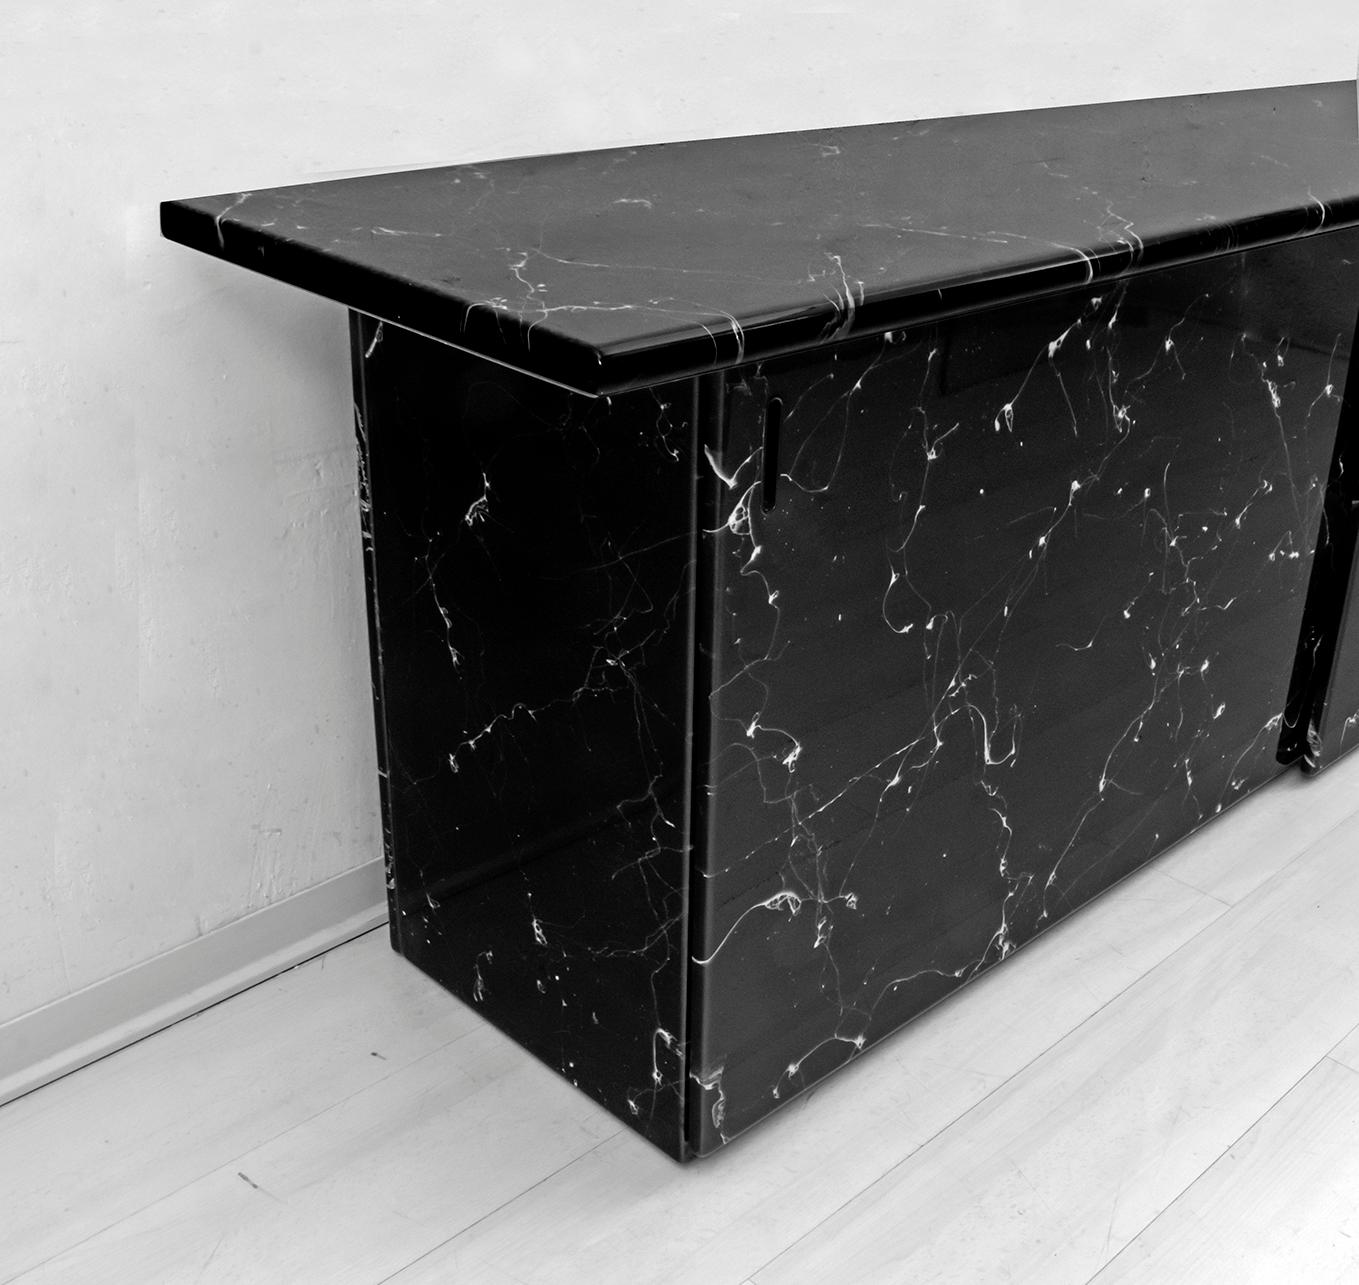 Wood Marquina Black Marble lacquer Italian Post Modern Sideboard, 1980s For Sale